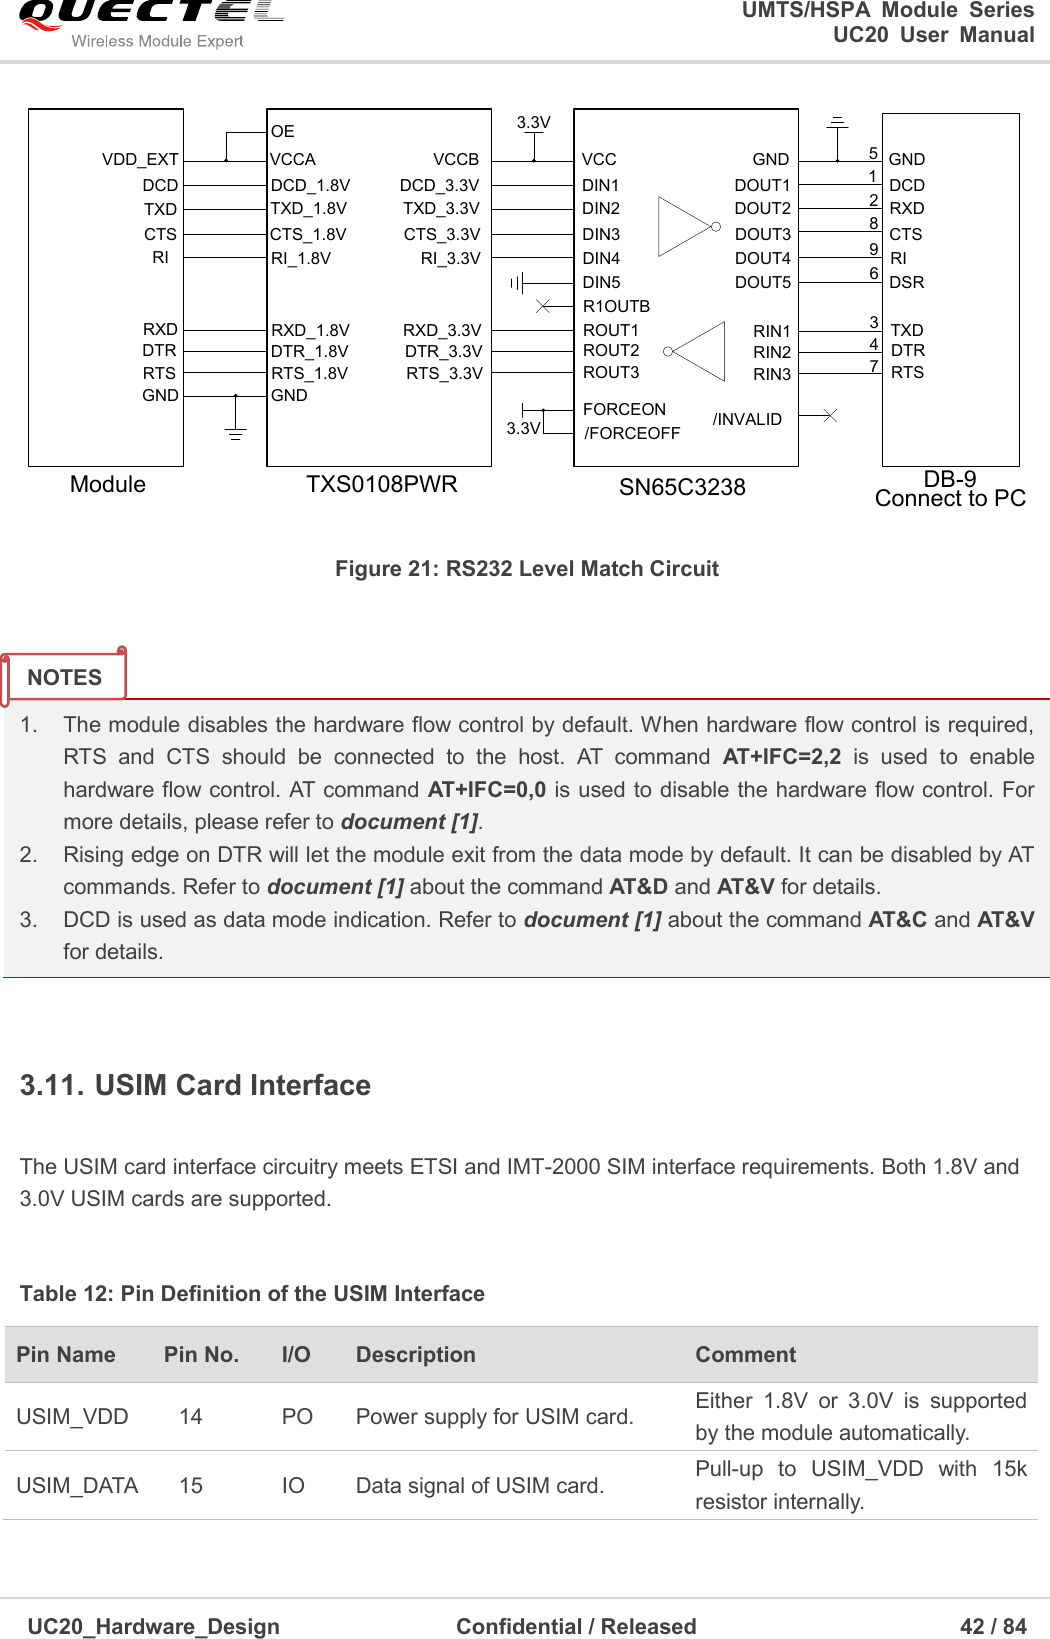                                                                                                                                               UMTS/HSPA  Module  Series                                                                 UC20  User  Manual  UC20_Hardware_Design                  Confidential / Released                            42 / 84     TXS0108PWRDCD_3.3VRTS_3.3VDTR_3.3VRXD_3.3VRI_3.3VCTS_3.3VTXD_3.3VDCDRTSDTRRXDRICTSTXDDCD_1.8VRTS_1.8VDTR_1.8VRXD_1.8VRI_1.8VCTS_1.8VTXD_1.8VVCCAModuleGND GNDVDD_EXT VCCB3.3VDIN1ROUT3ROUT2ROUT1DIN4DIN3DIN2DIN5R1OUTBFORCEON/FORCEOFF /INVALID3.3VDOUT1DOUT2DOUT3DOUT4DOUT5RIN3RIN2RIN1VCC GNDOESN65C3238 DB-9Connect to PCDCDRTSDTRTXDRICTSRXDDSRGND123456789 Figure 21: RS232 Level Match Circuit   1.  The module disables the hardware flow control by default. When hardware flow control is required, RTS  and  CTS  should  be  connected  to  the  host.  AT  command  AT+IFC=2,2  is  used  to  enable hardware flow control. AT command AT+IFC=0,0 is used to disable the hardware flow control. For more details, please refer to document [1]. 2.  Rising edge on DTR will let the module exit from the data mode by default. It can be disabled by AT commands. Refer to document [1] about the command AT&amp;D and AT&amp;V for details. 3.  DCD is used as data mode indication. Refer to document [1] about the command AT&amp;C and AT&amp;V for details.  3.11. USIM Card Interface  The USIM card interface circuitry meets ETSI and IMT-2000 SIM interface requirements. Both 1.8V and 3.0V USIM cards are supported.  Table 12: Pin Definition of the USIM Interface Pin Name   Pin No. I/O Description Comment USIM_VDD 14 PO Power supply for USIM card. Either  1.8V  or  3.0V  is  supported by the module automatically. USIM_DATA 15 IO Data signal of USIM card. Pull-up  to  USIM_VDD  with  15k resistor internally. NOTES 